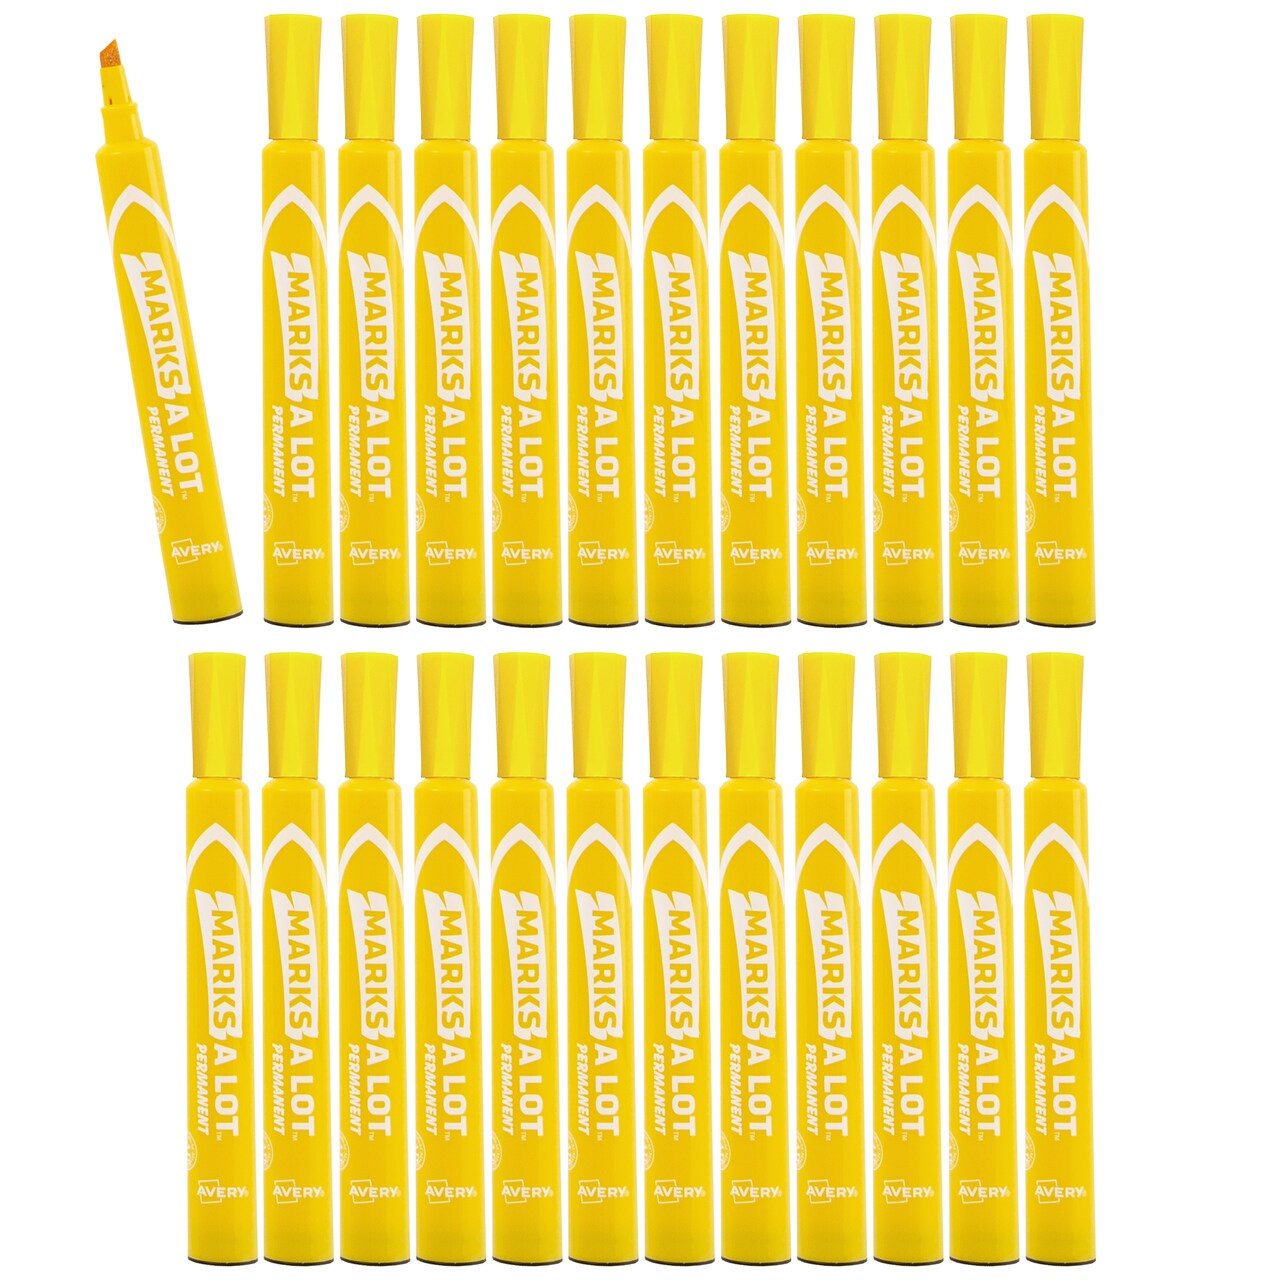 Avery Marks A Lot Permanent Markers, Chisel Tip, Large Desk-Style Size, 12  per Pack, 2 Packs, 24 Yellow Markers Total (50215)